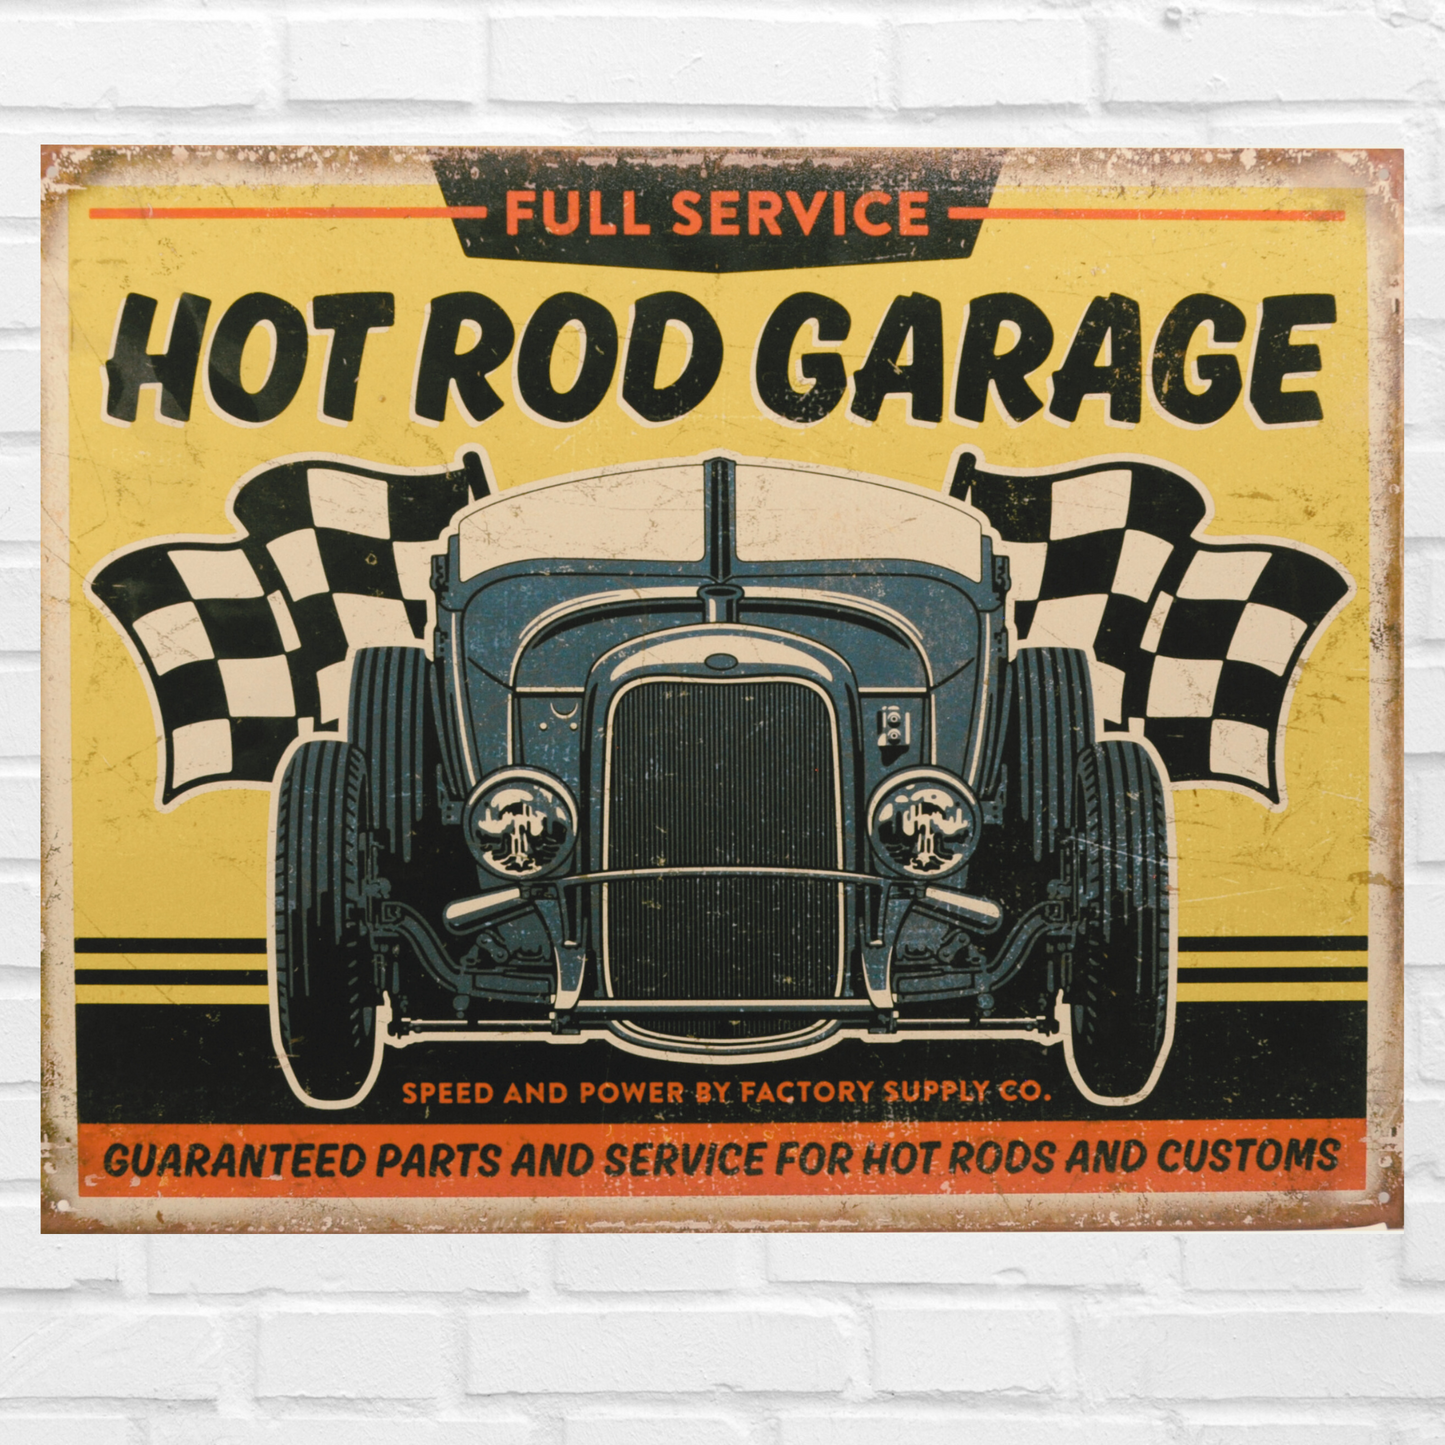 Vintage Poster Print that says "Full service Hot Rod Garage, Guaranteed part and service for hot rods and customs" with a vintage car in the middle. 